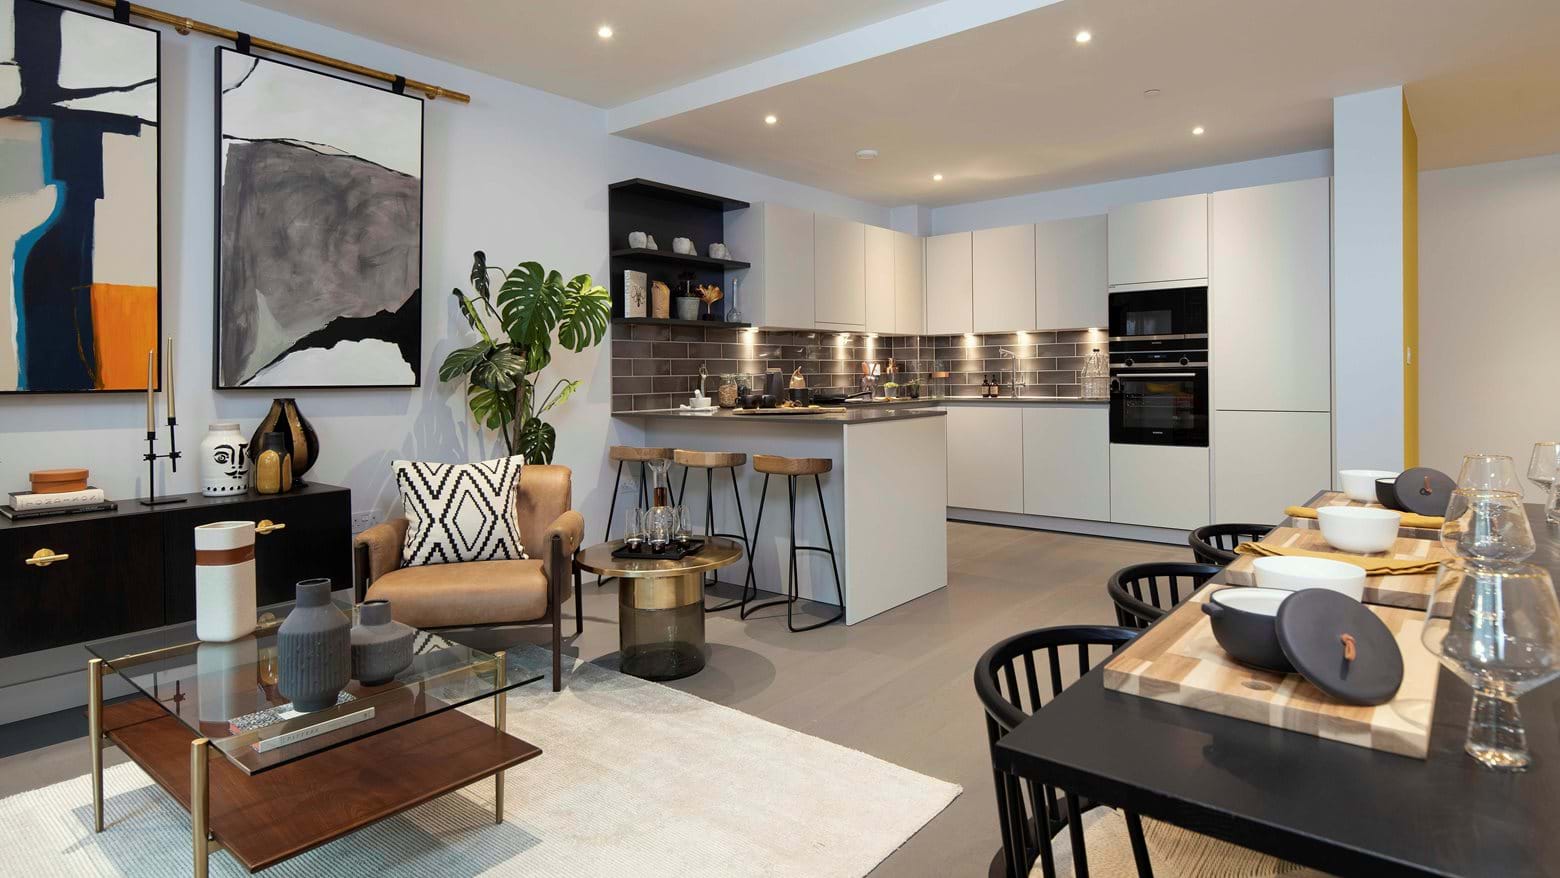 Shared Ownership at Lazenby Square